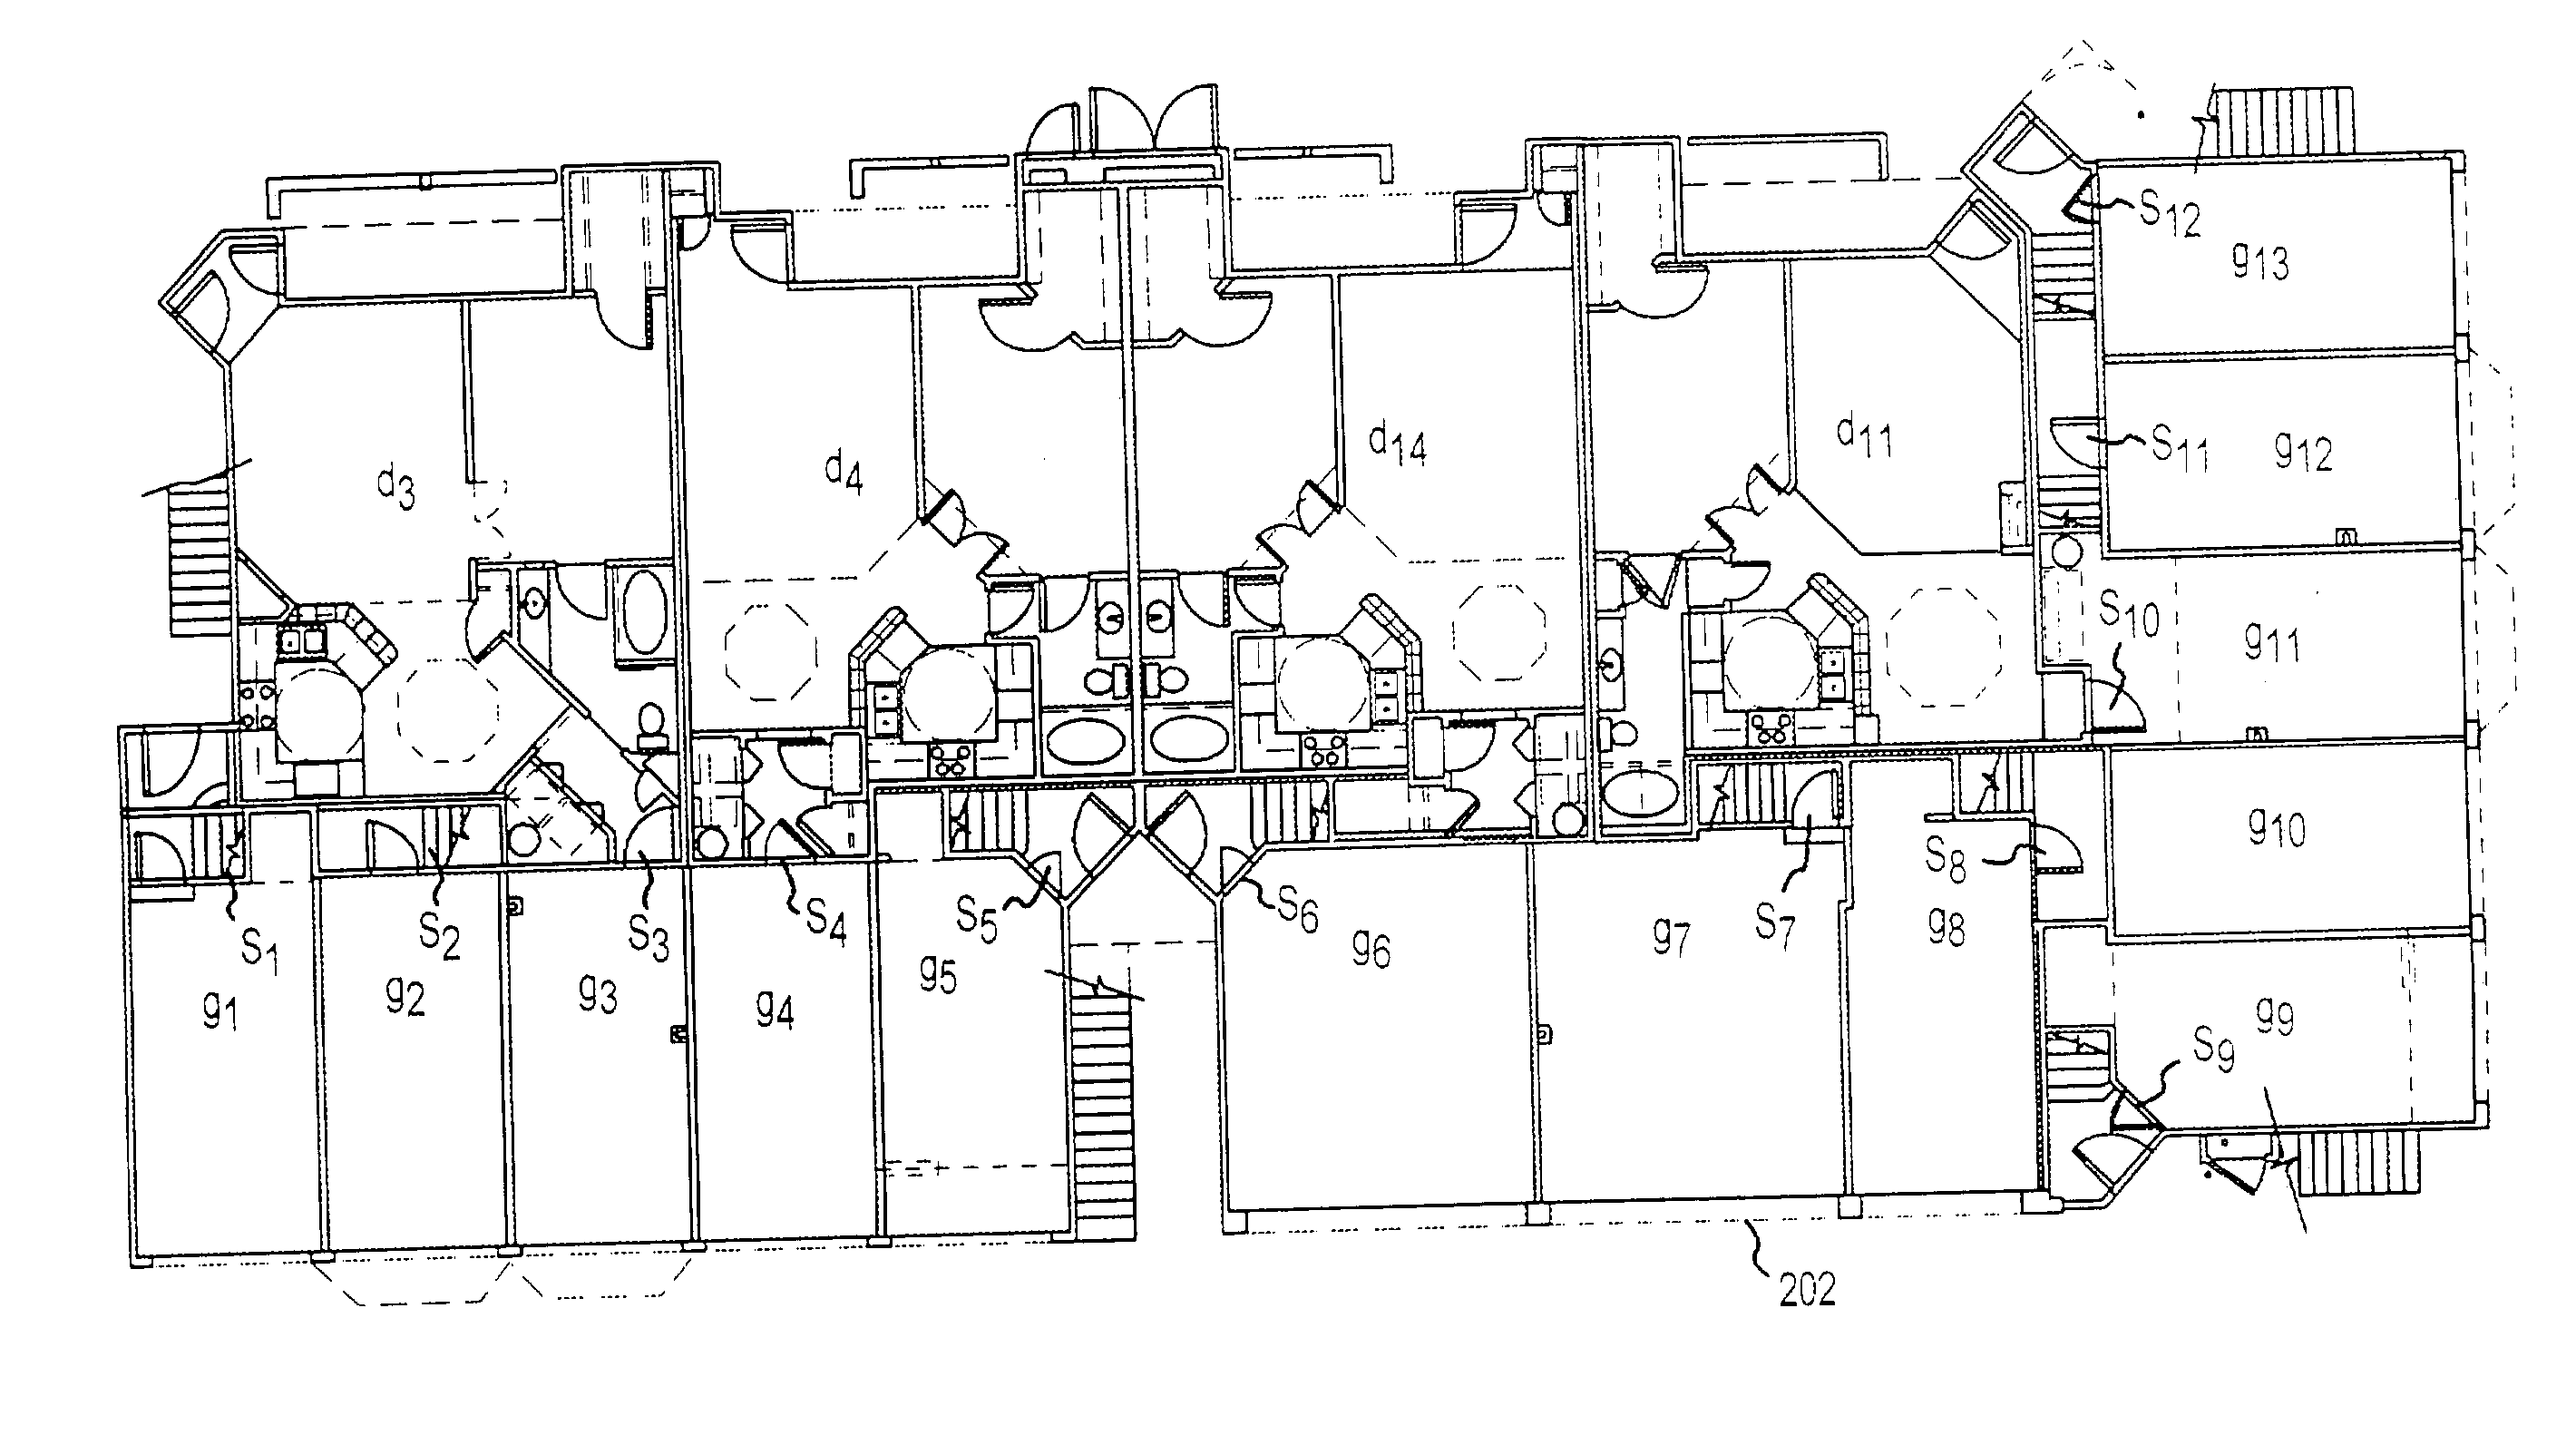 Methods and apparatus for a multi-story dwelling with attached garages